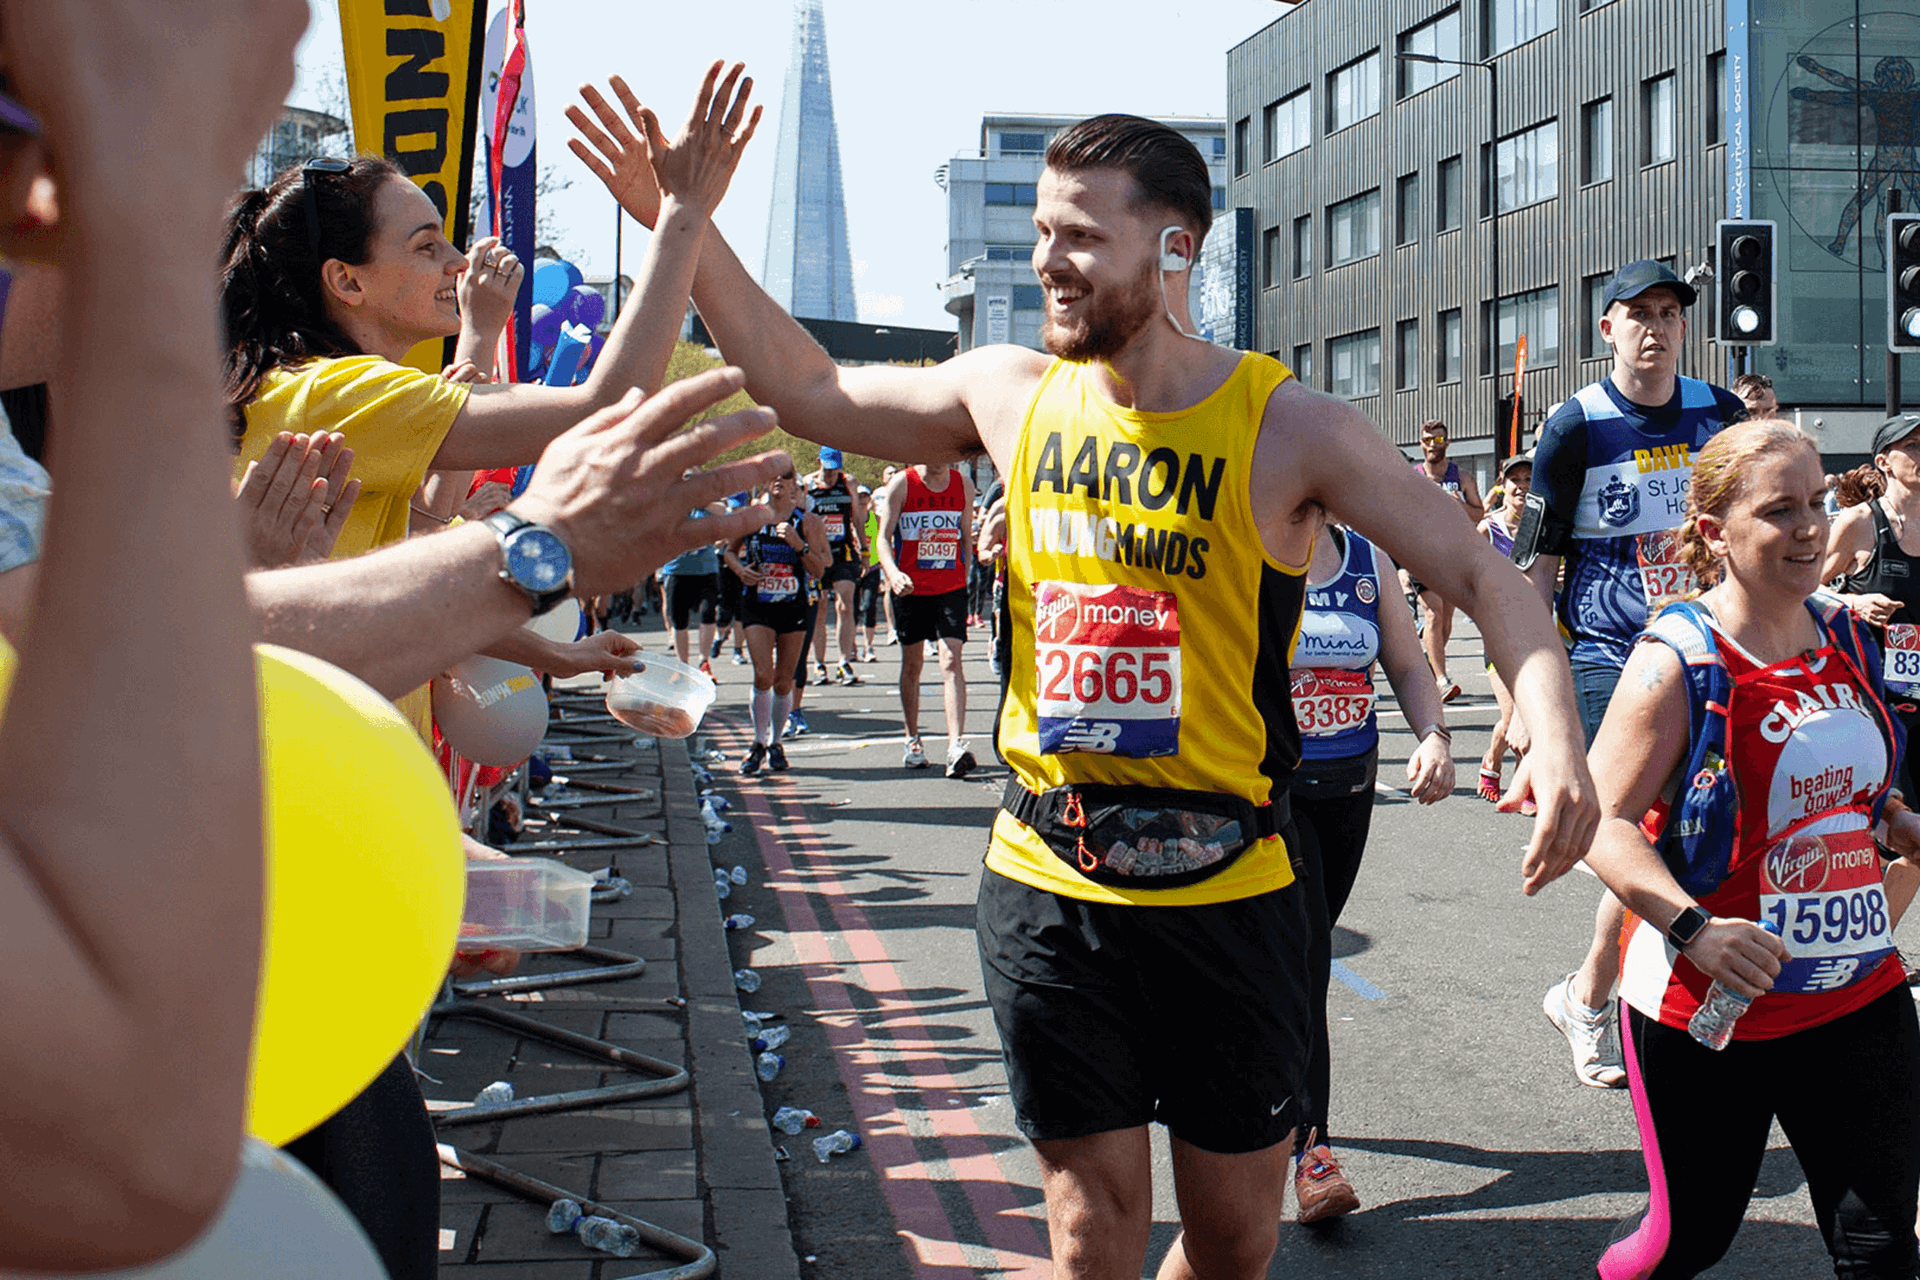 Runner gives a high five to a YoungMinds cheerer in the crowd during a marathon